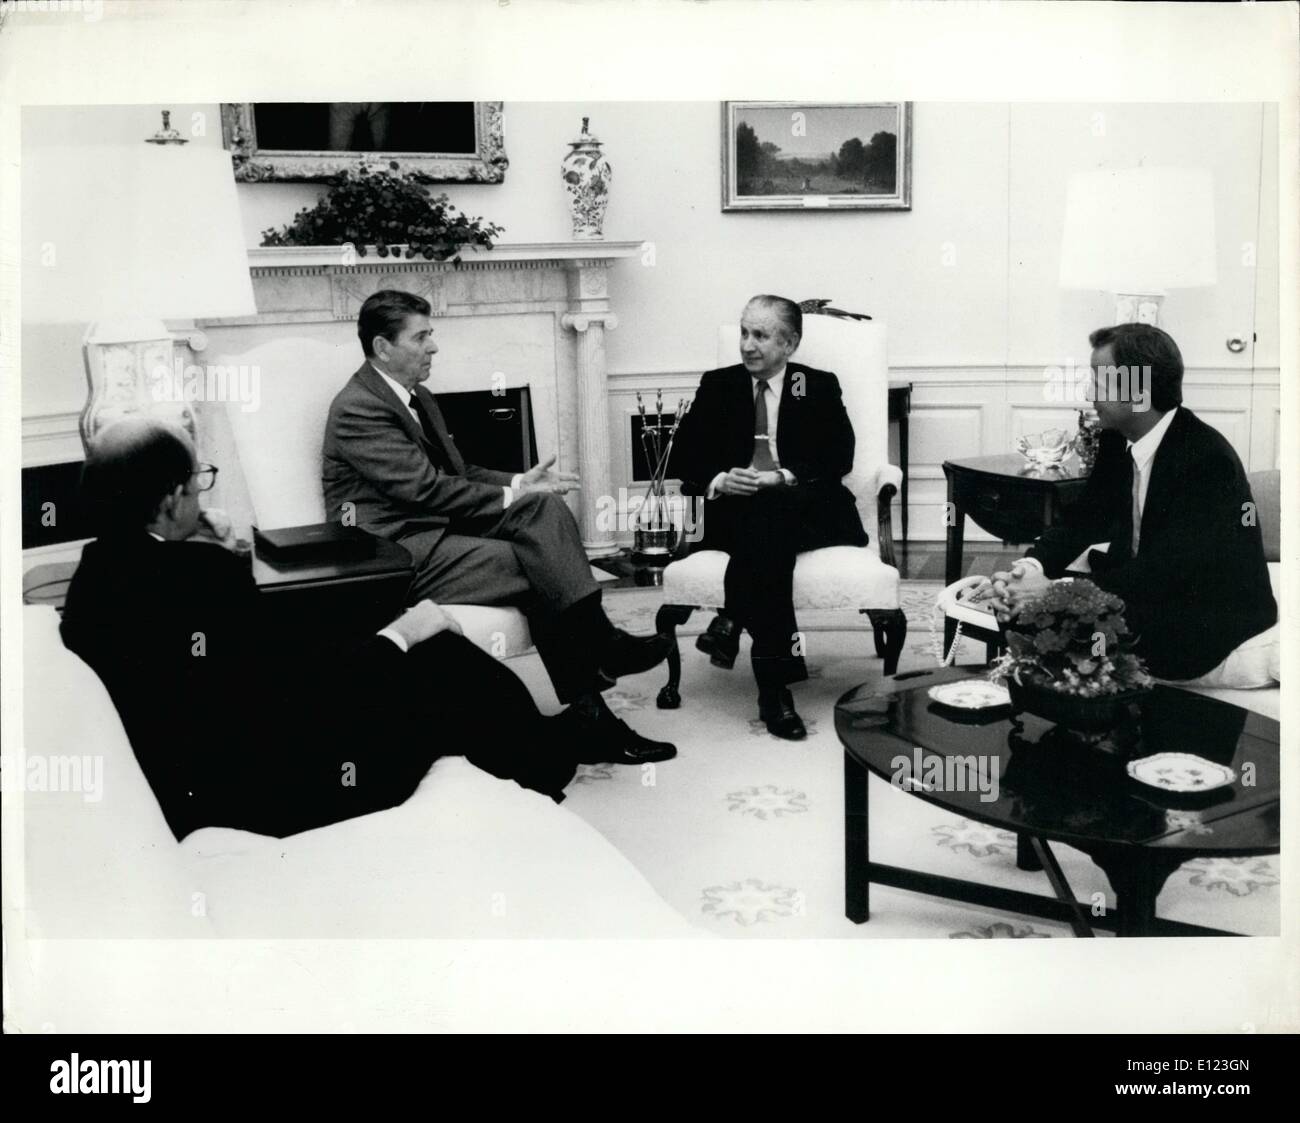 May 05, 1984 - Olympic Talk At The White House: President Ronald Reagan meets in the Oval Office today with officials of the International Olympic Committee and the Los Angles Olympic Committee. Photo shows Juan Antonio Samaranch (white chair), President of the International Olympic Committee; Peter Ueberroth, President of the Los Angeles Olympic Committee, and Michael Deaver, Deputy Chief of Staff and Assistant to the President. Stock Photo